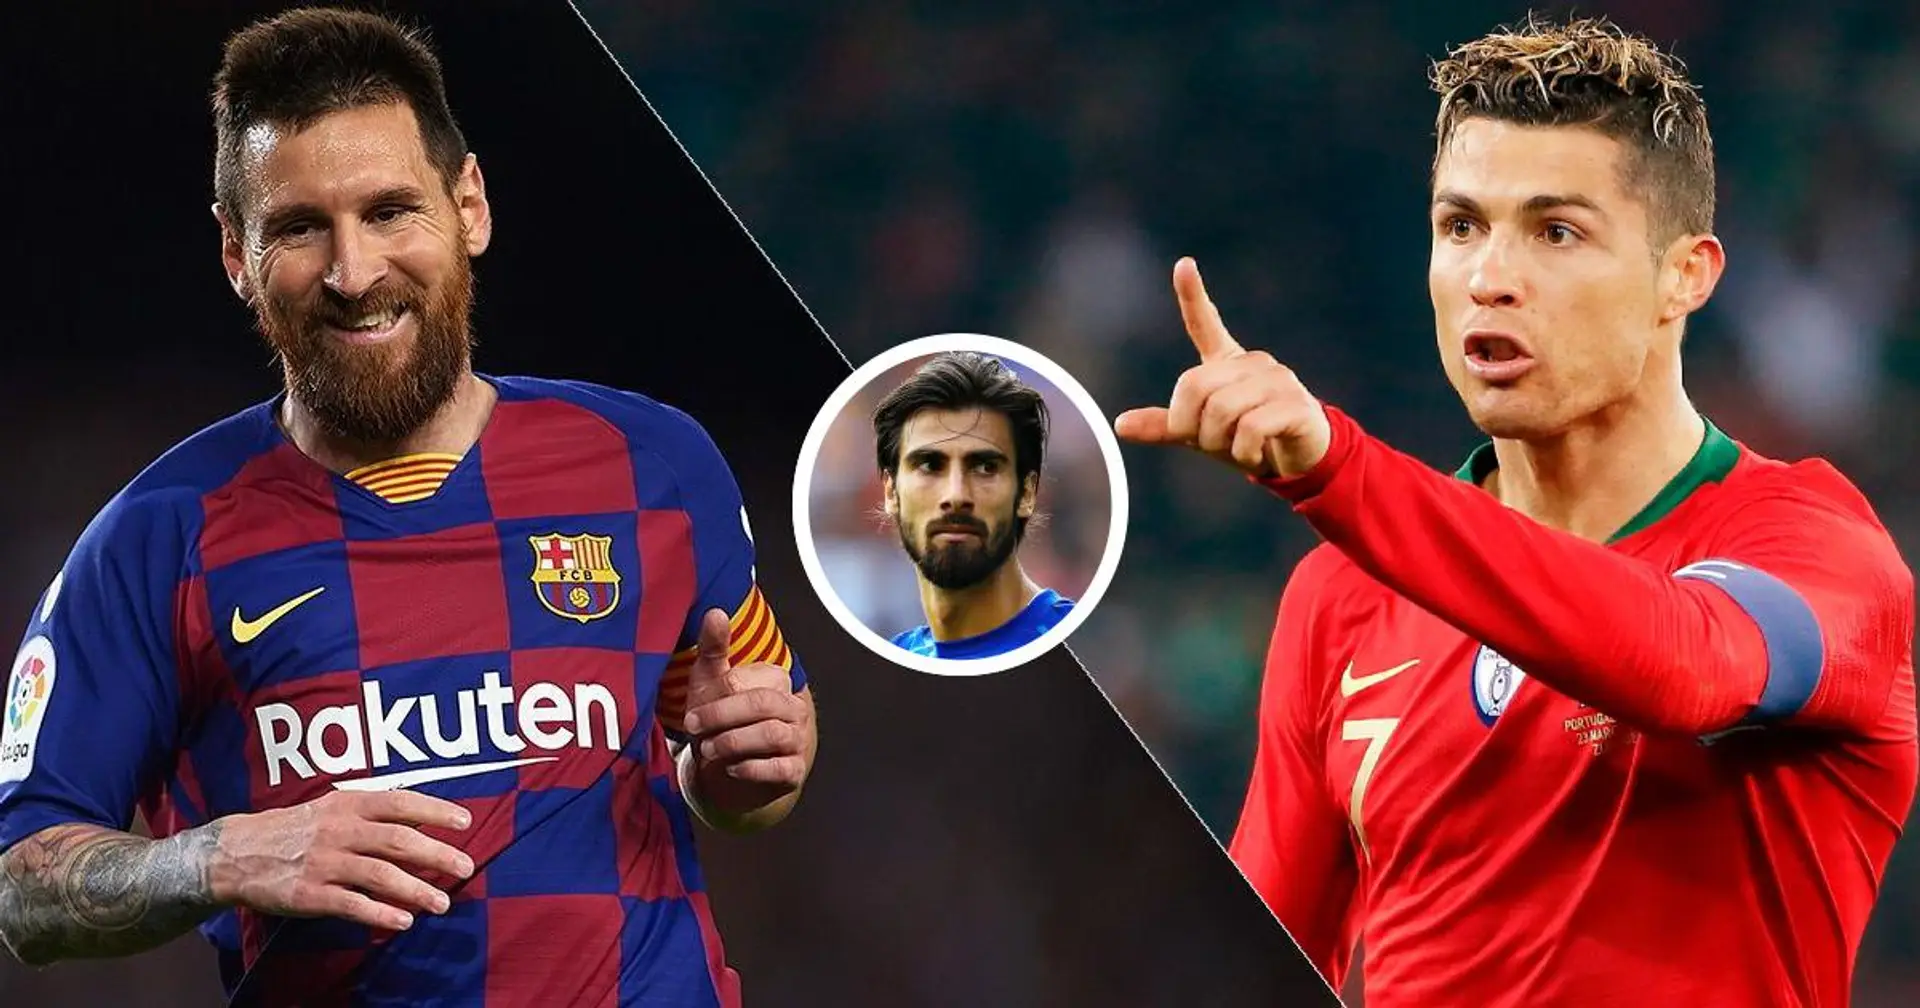 Andre Gomes weighs in on neverending Leo Messi-Cristiano Ronaldo debate